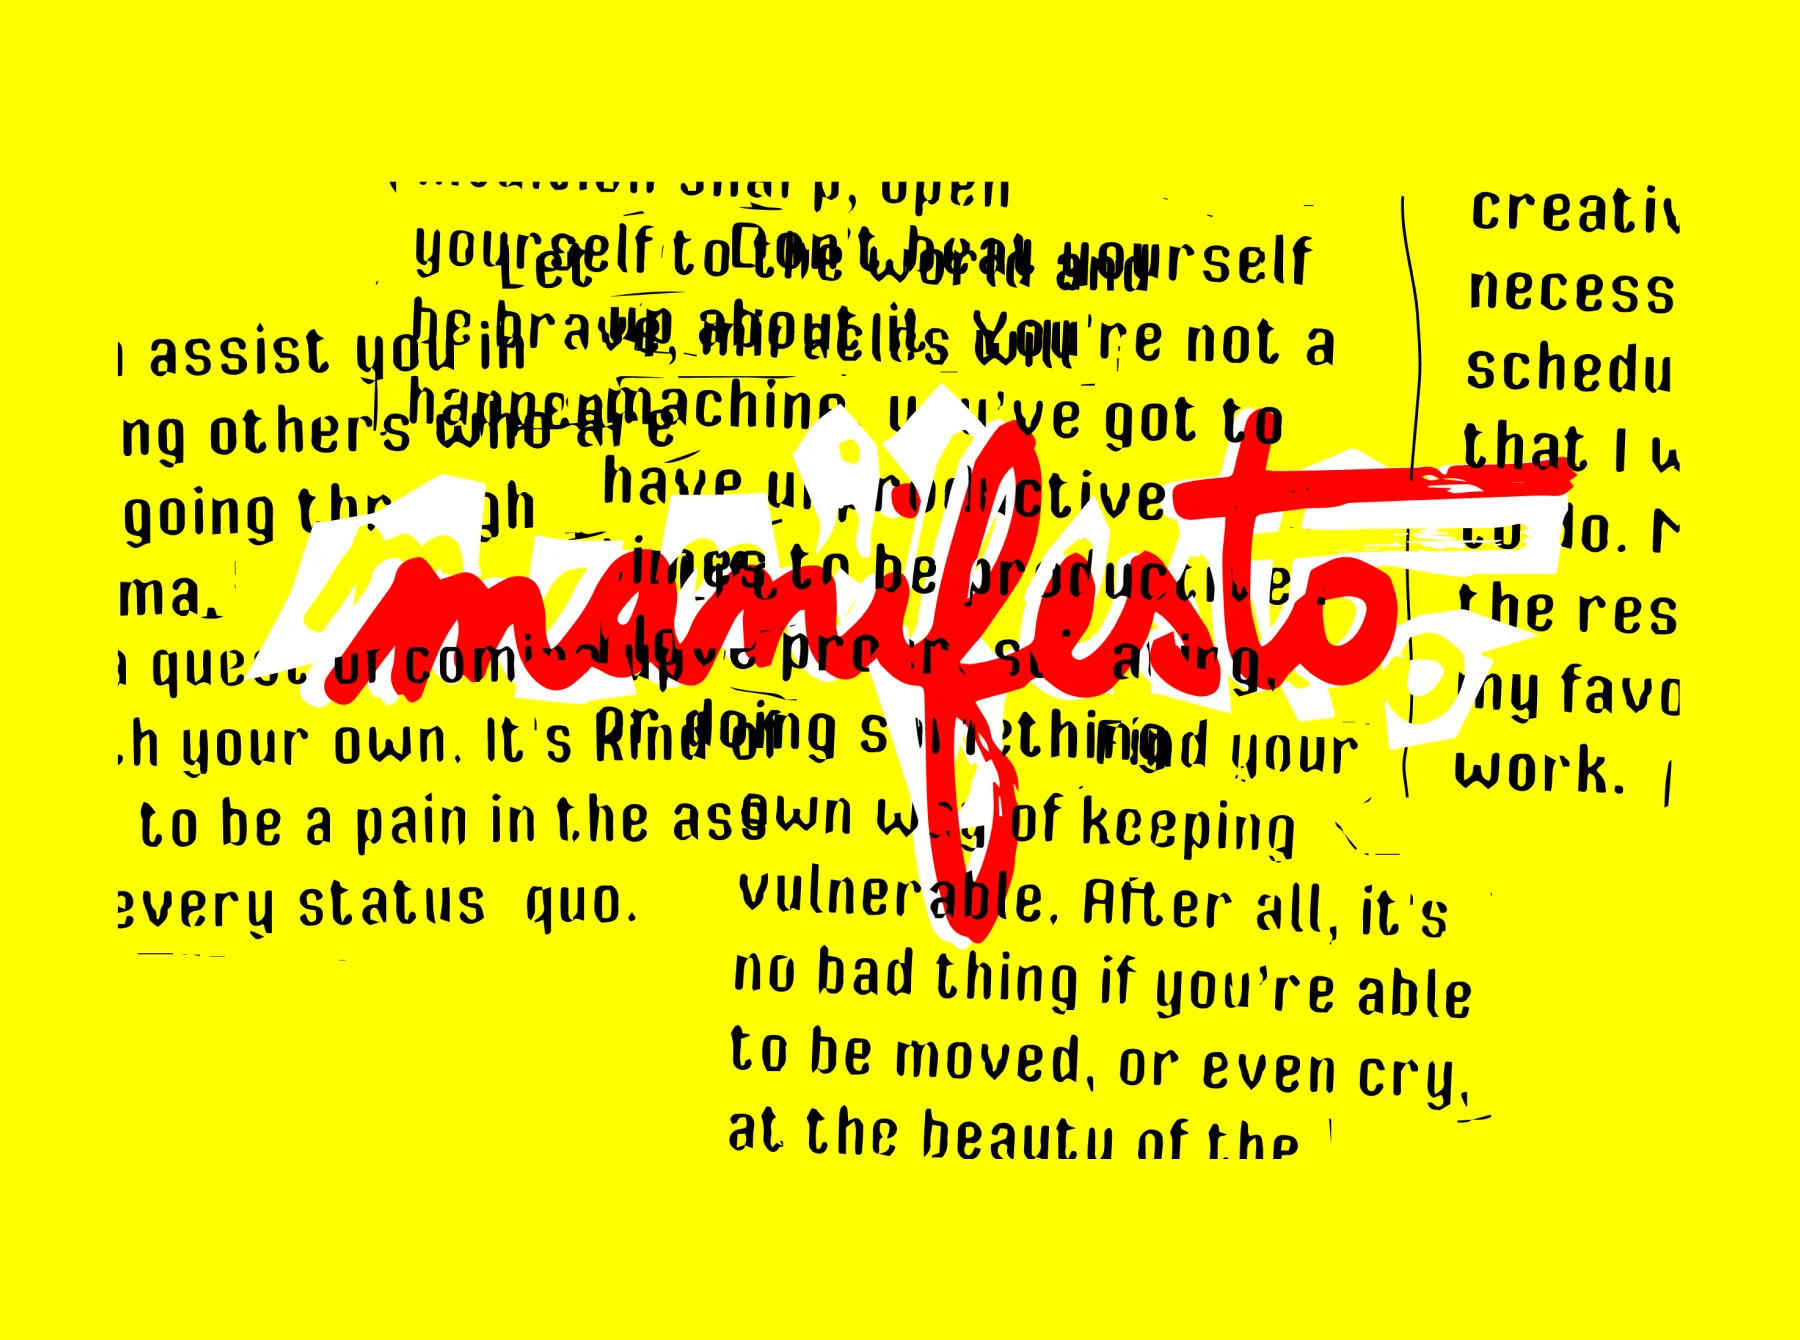 A Manifesto by Pussy Riot